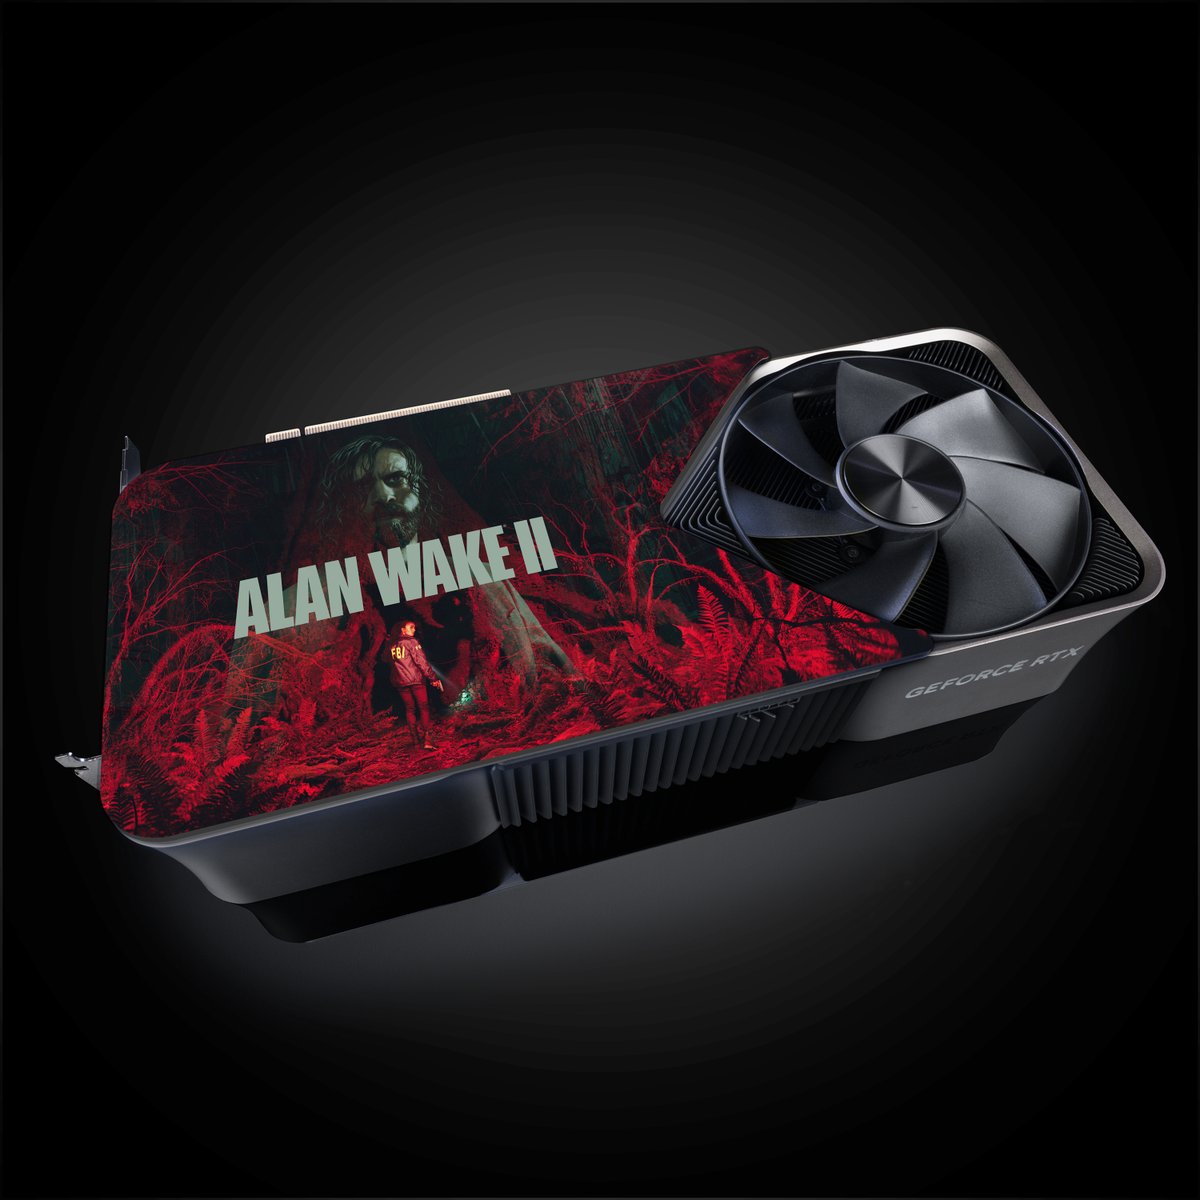 Enter the Dark Place for a chance to win🔦🌃  

To celebrate Alan Wake 2 and its official release w/ full ray tracing + NVIDIA DLSS 3.5 w/ Ray Reconstruction, we're giving away a NVIDIA GeForce RTX 4090 with a custom @AlanWake backplate. 

To enter:  
🟢 Like
🟢 Comment #RTXON